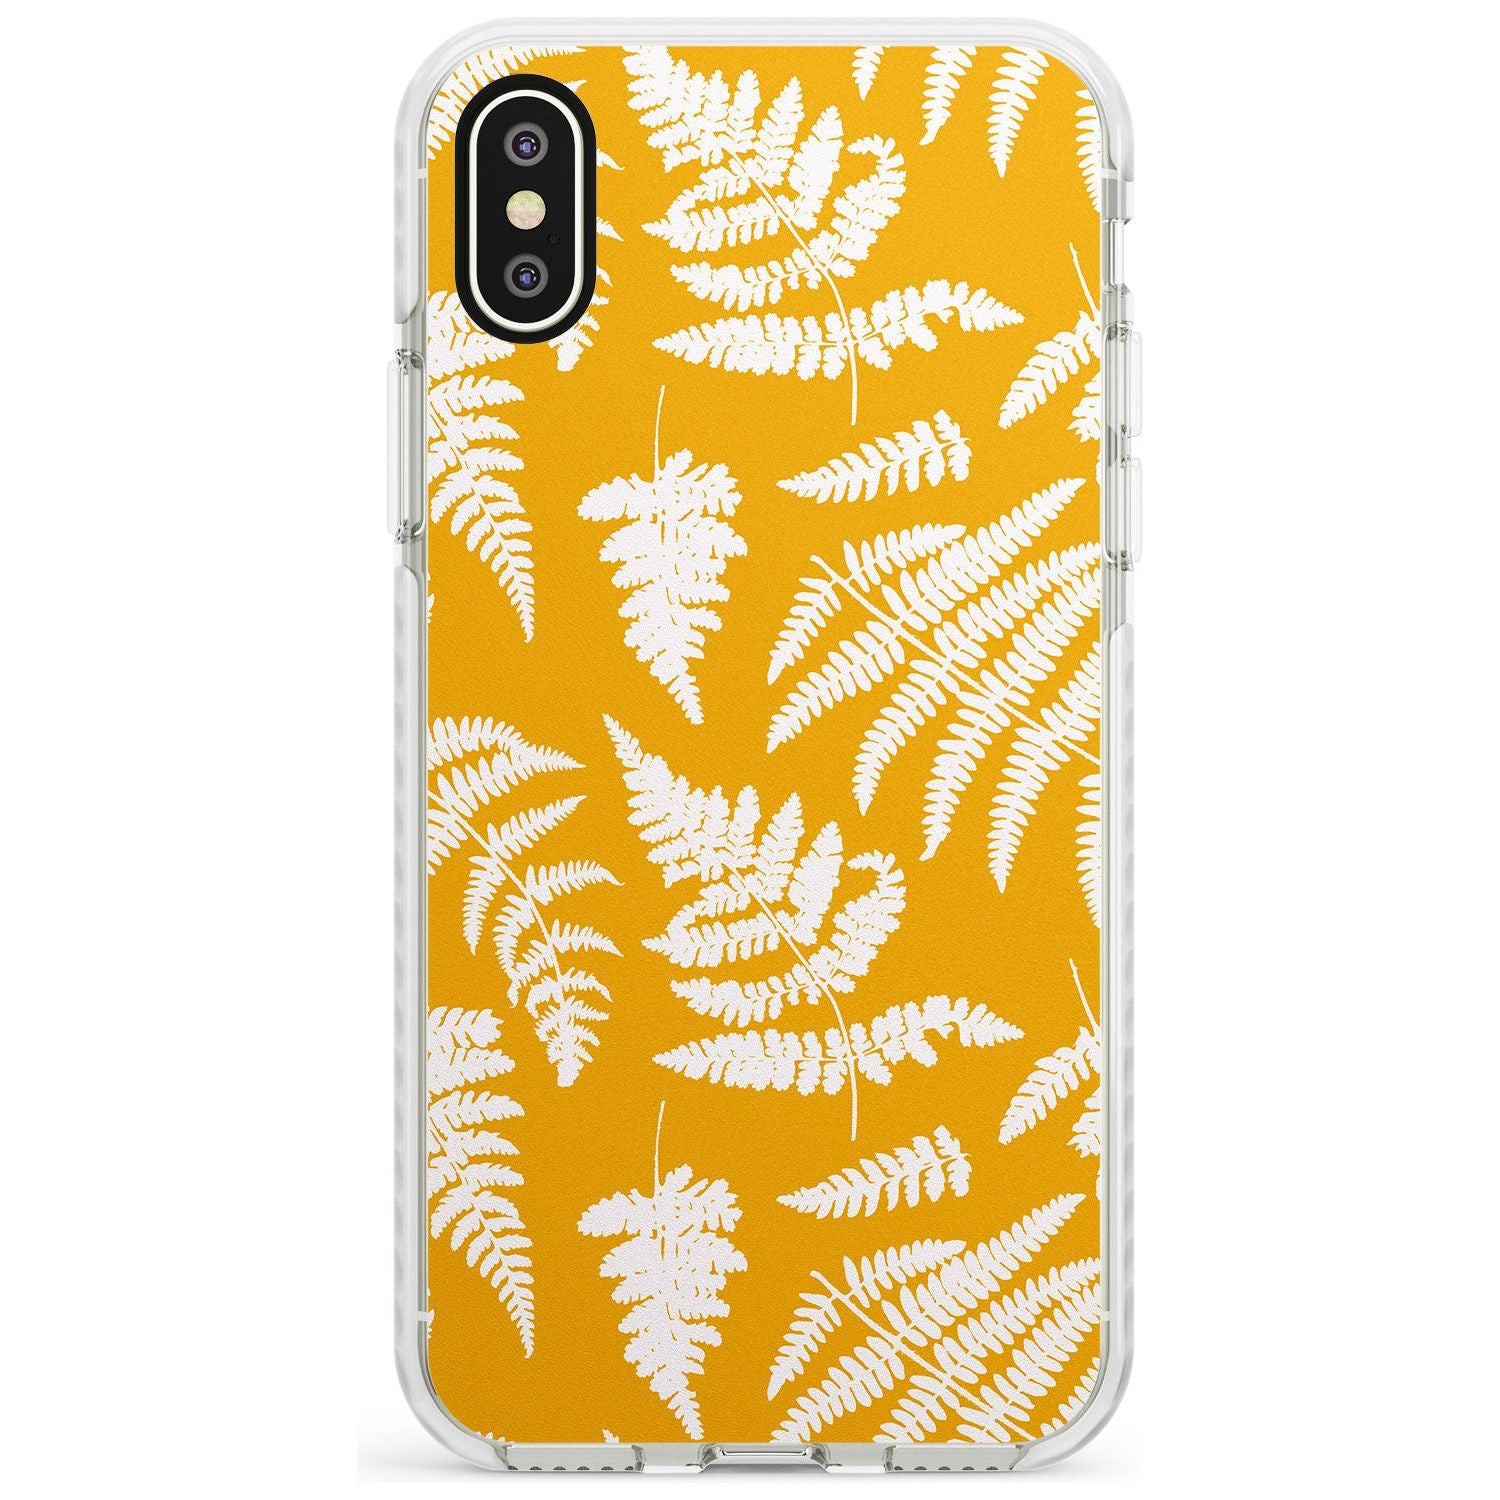 Fern Pattern on Yellow Impact Phone Case for iPhone X XS Max XR